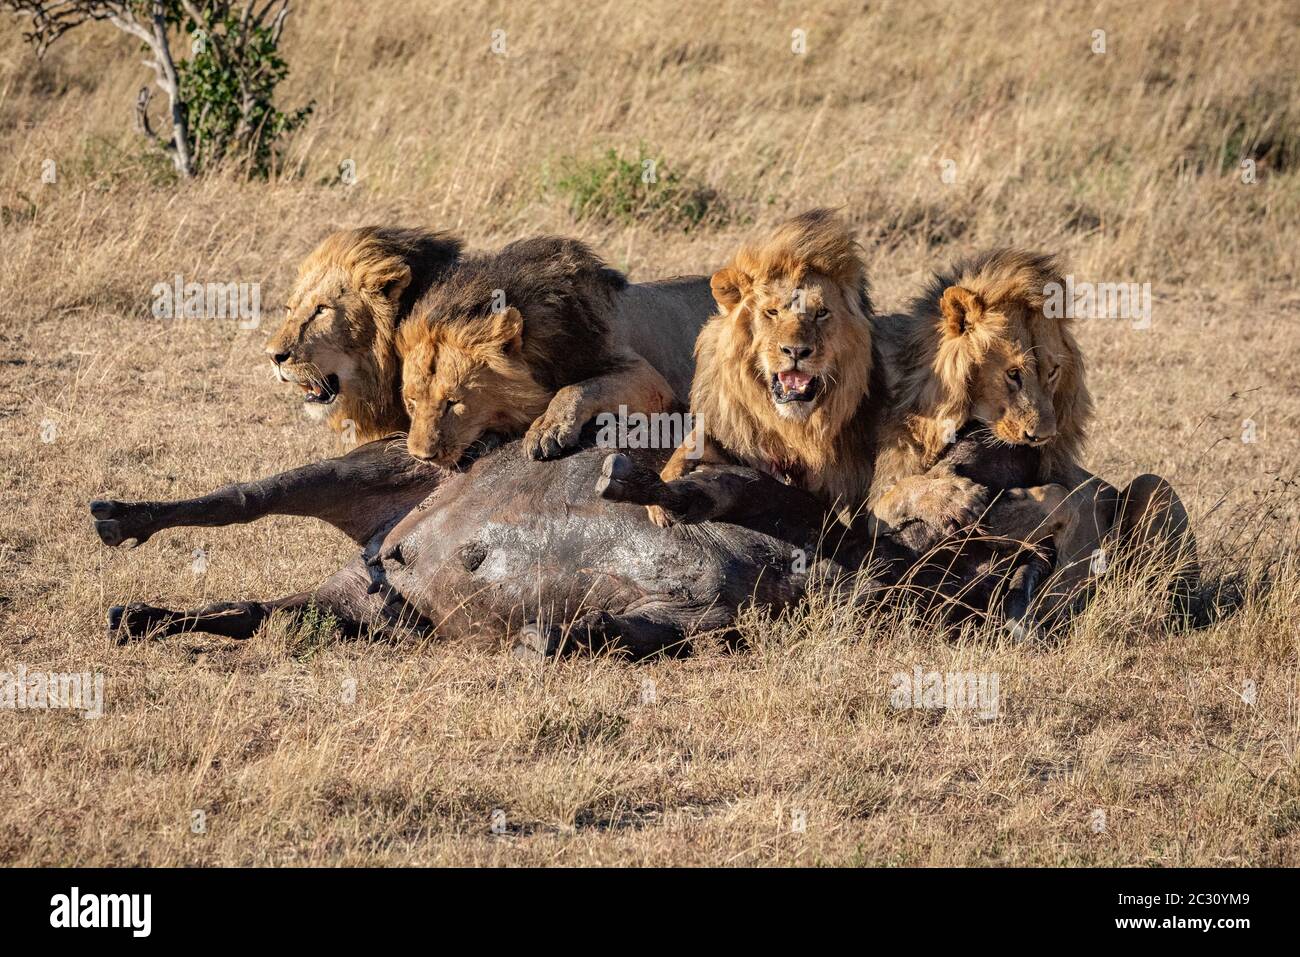 Page 3 - Lion Hunting Buffalo High Resolution Stock Photography and Images  - Alamy